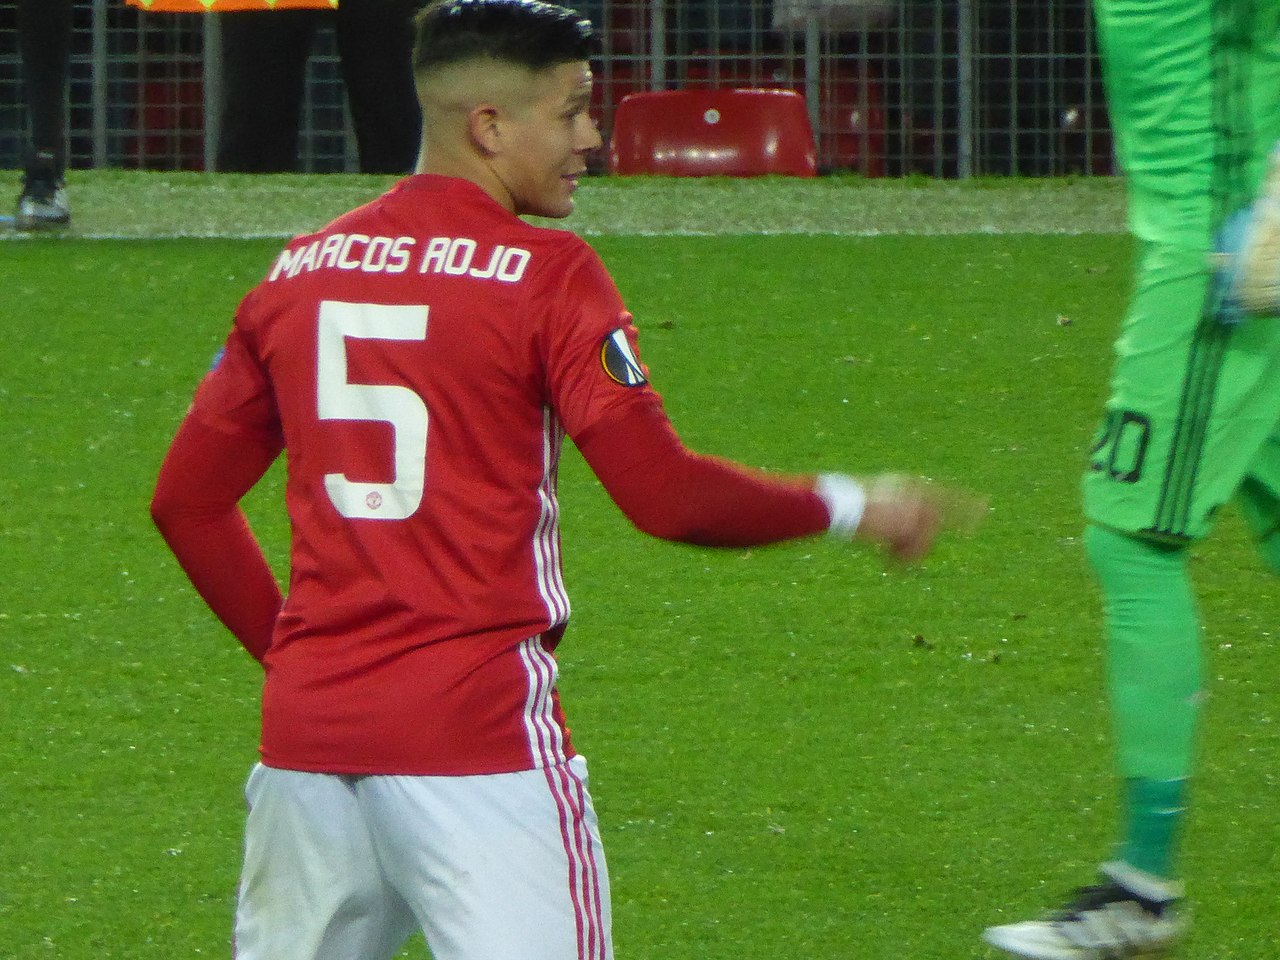 rojo jersey number